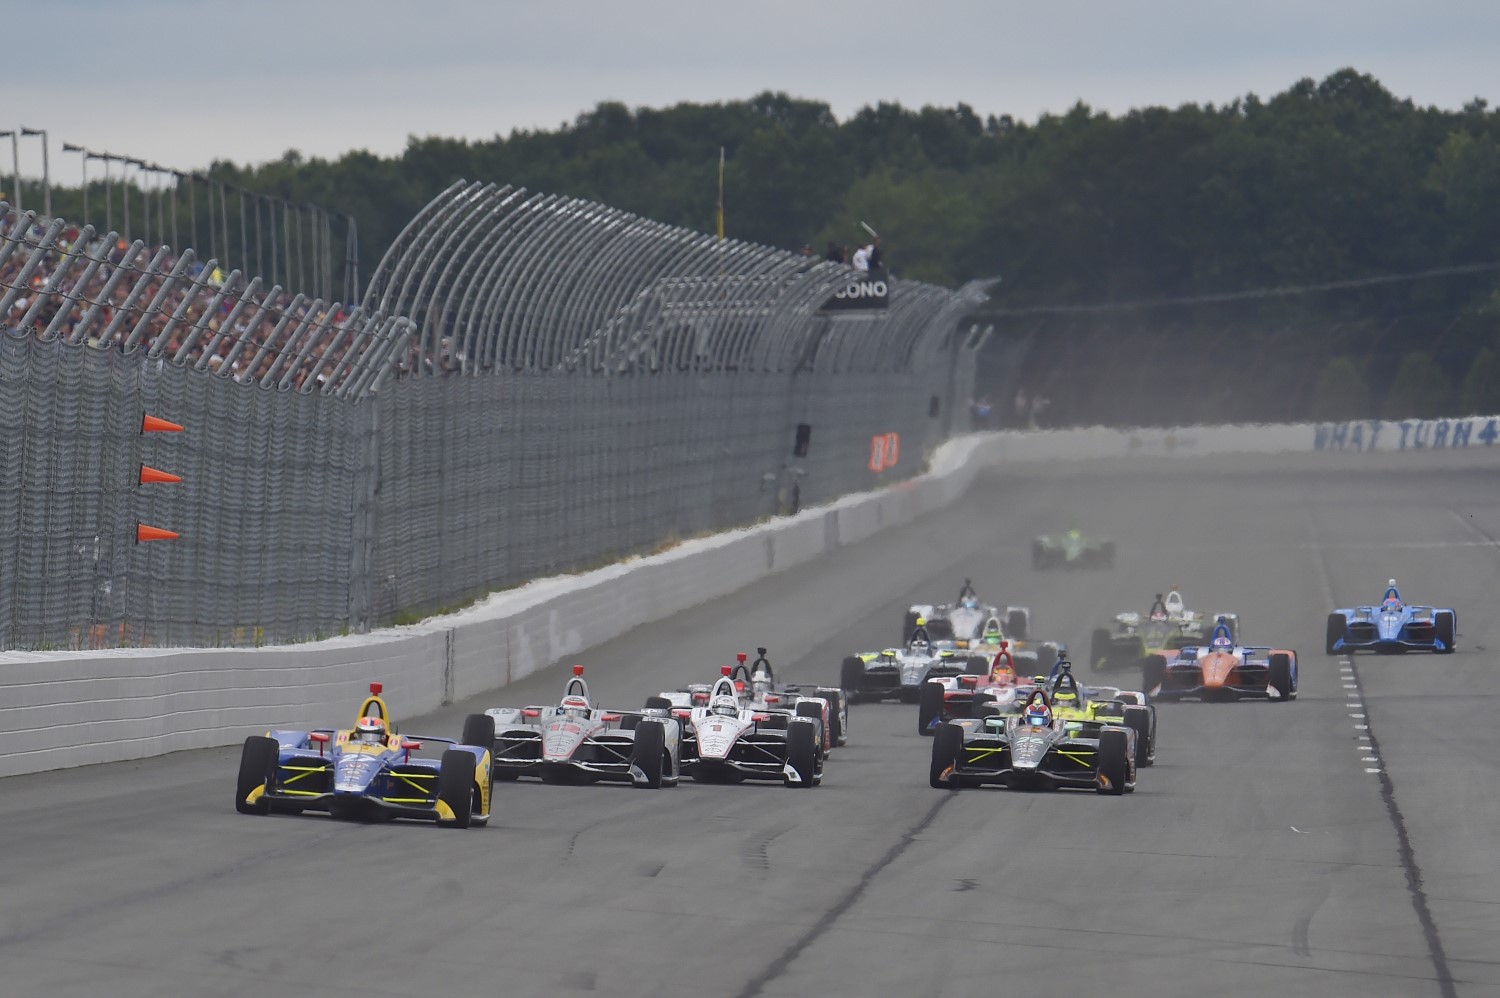 The Pocono IndyCar race. Too bad it was not a joint event given all the boring dead time there is during the IndyCar weekend.